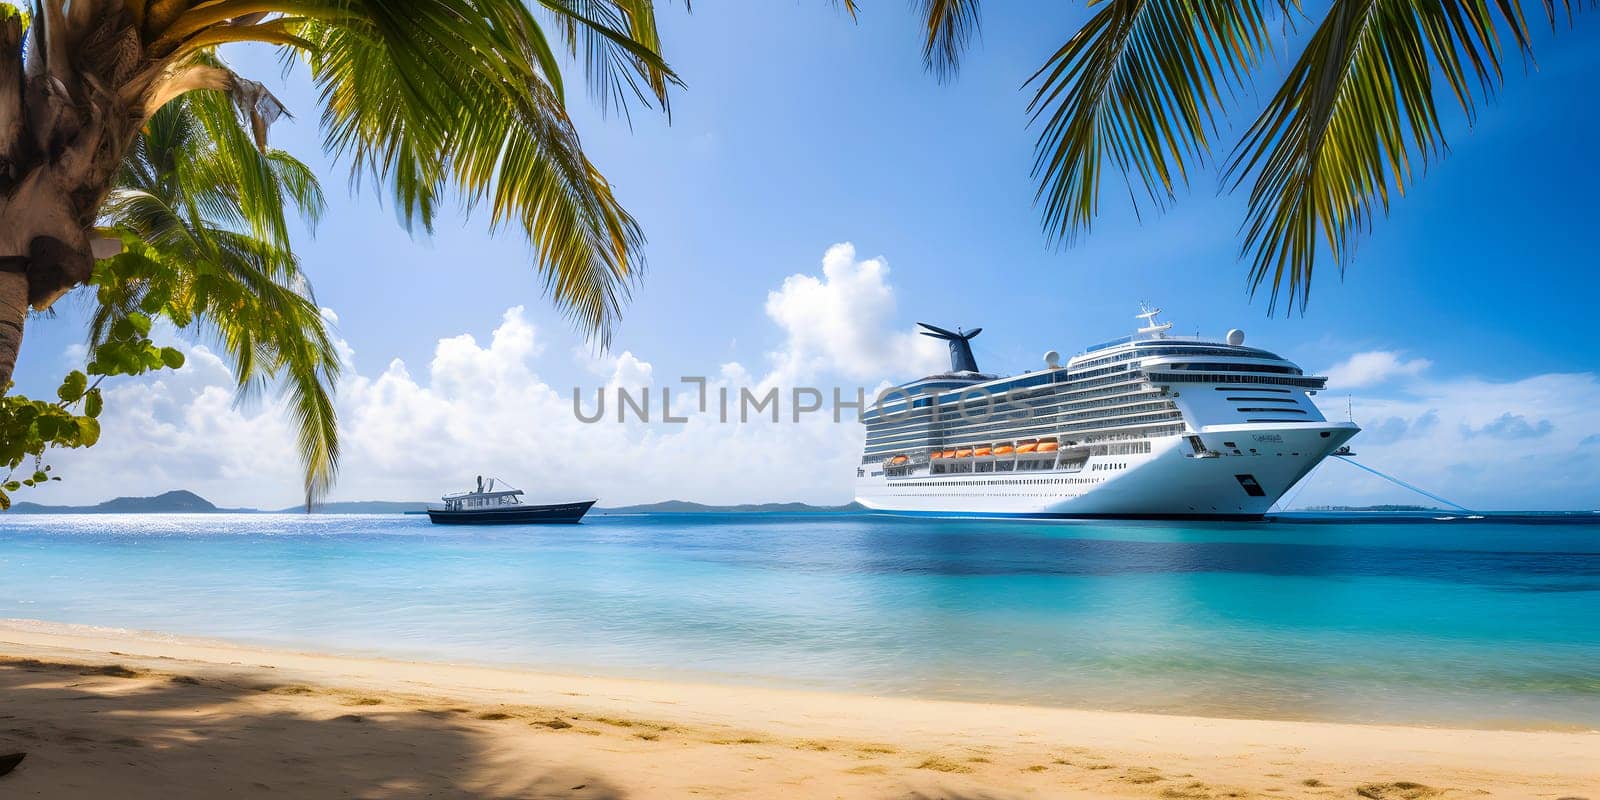 Large cruise liner in the background with a palm tree on white sand coral beach, neural network generated photorealistic image by z1b